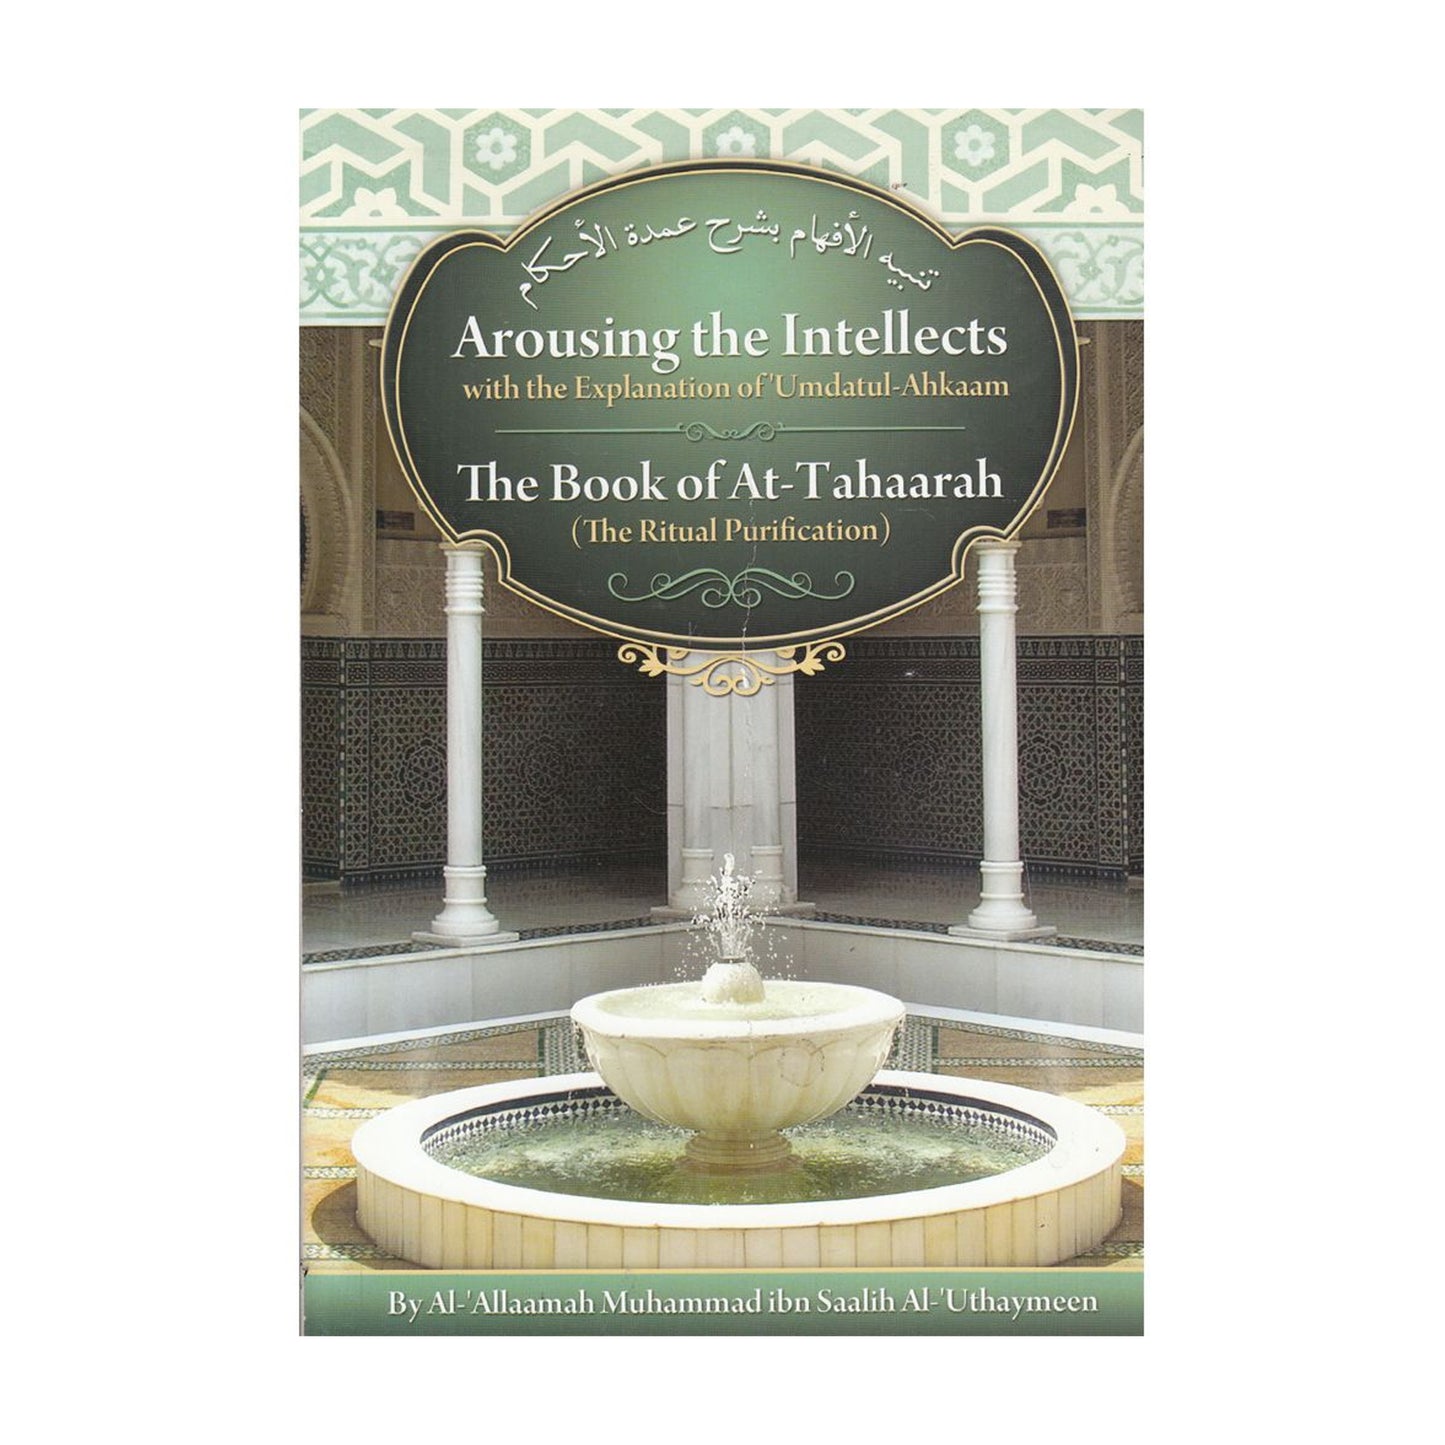 Arousing the intellects (The Book of At Taharaah)